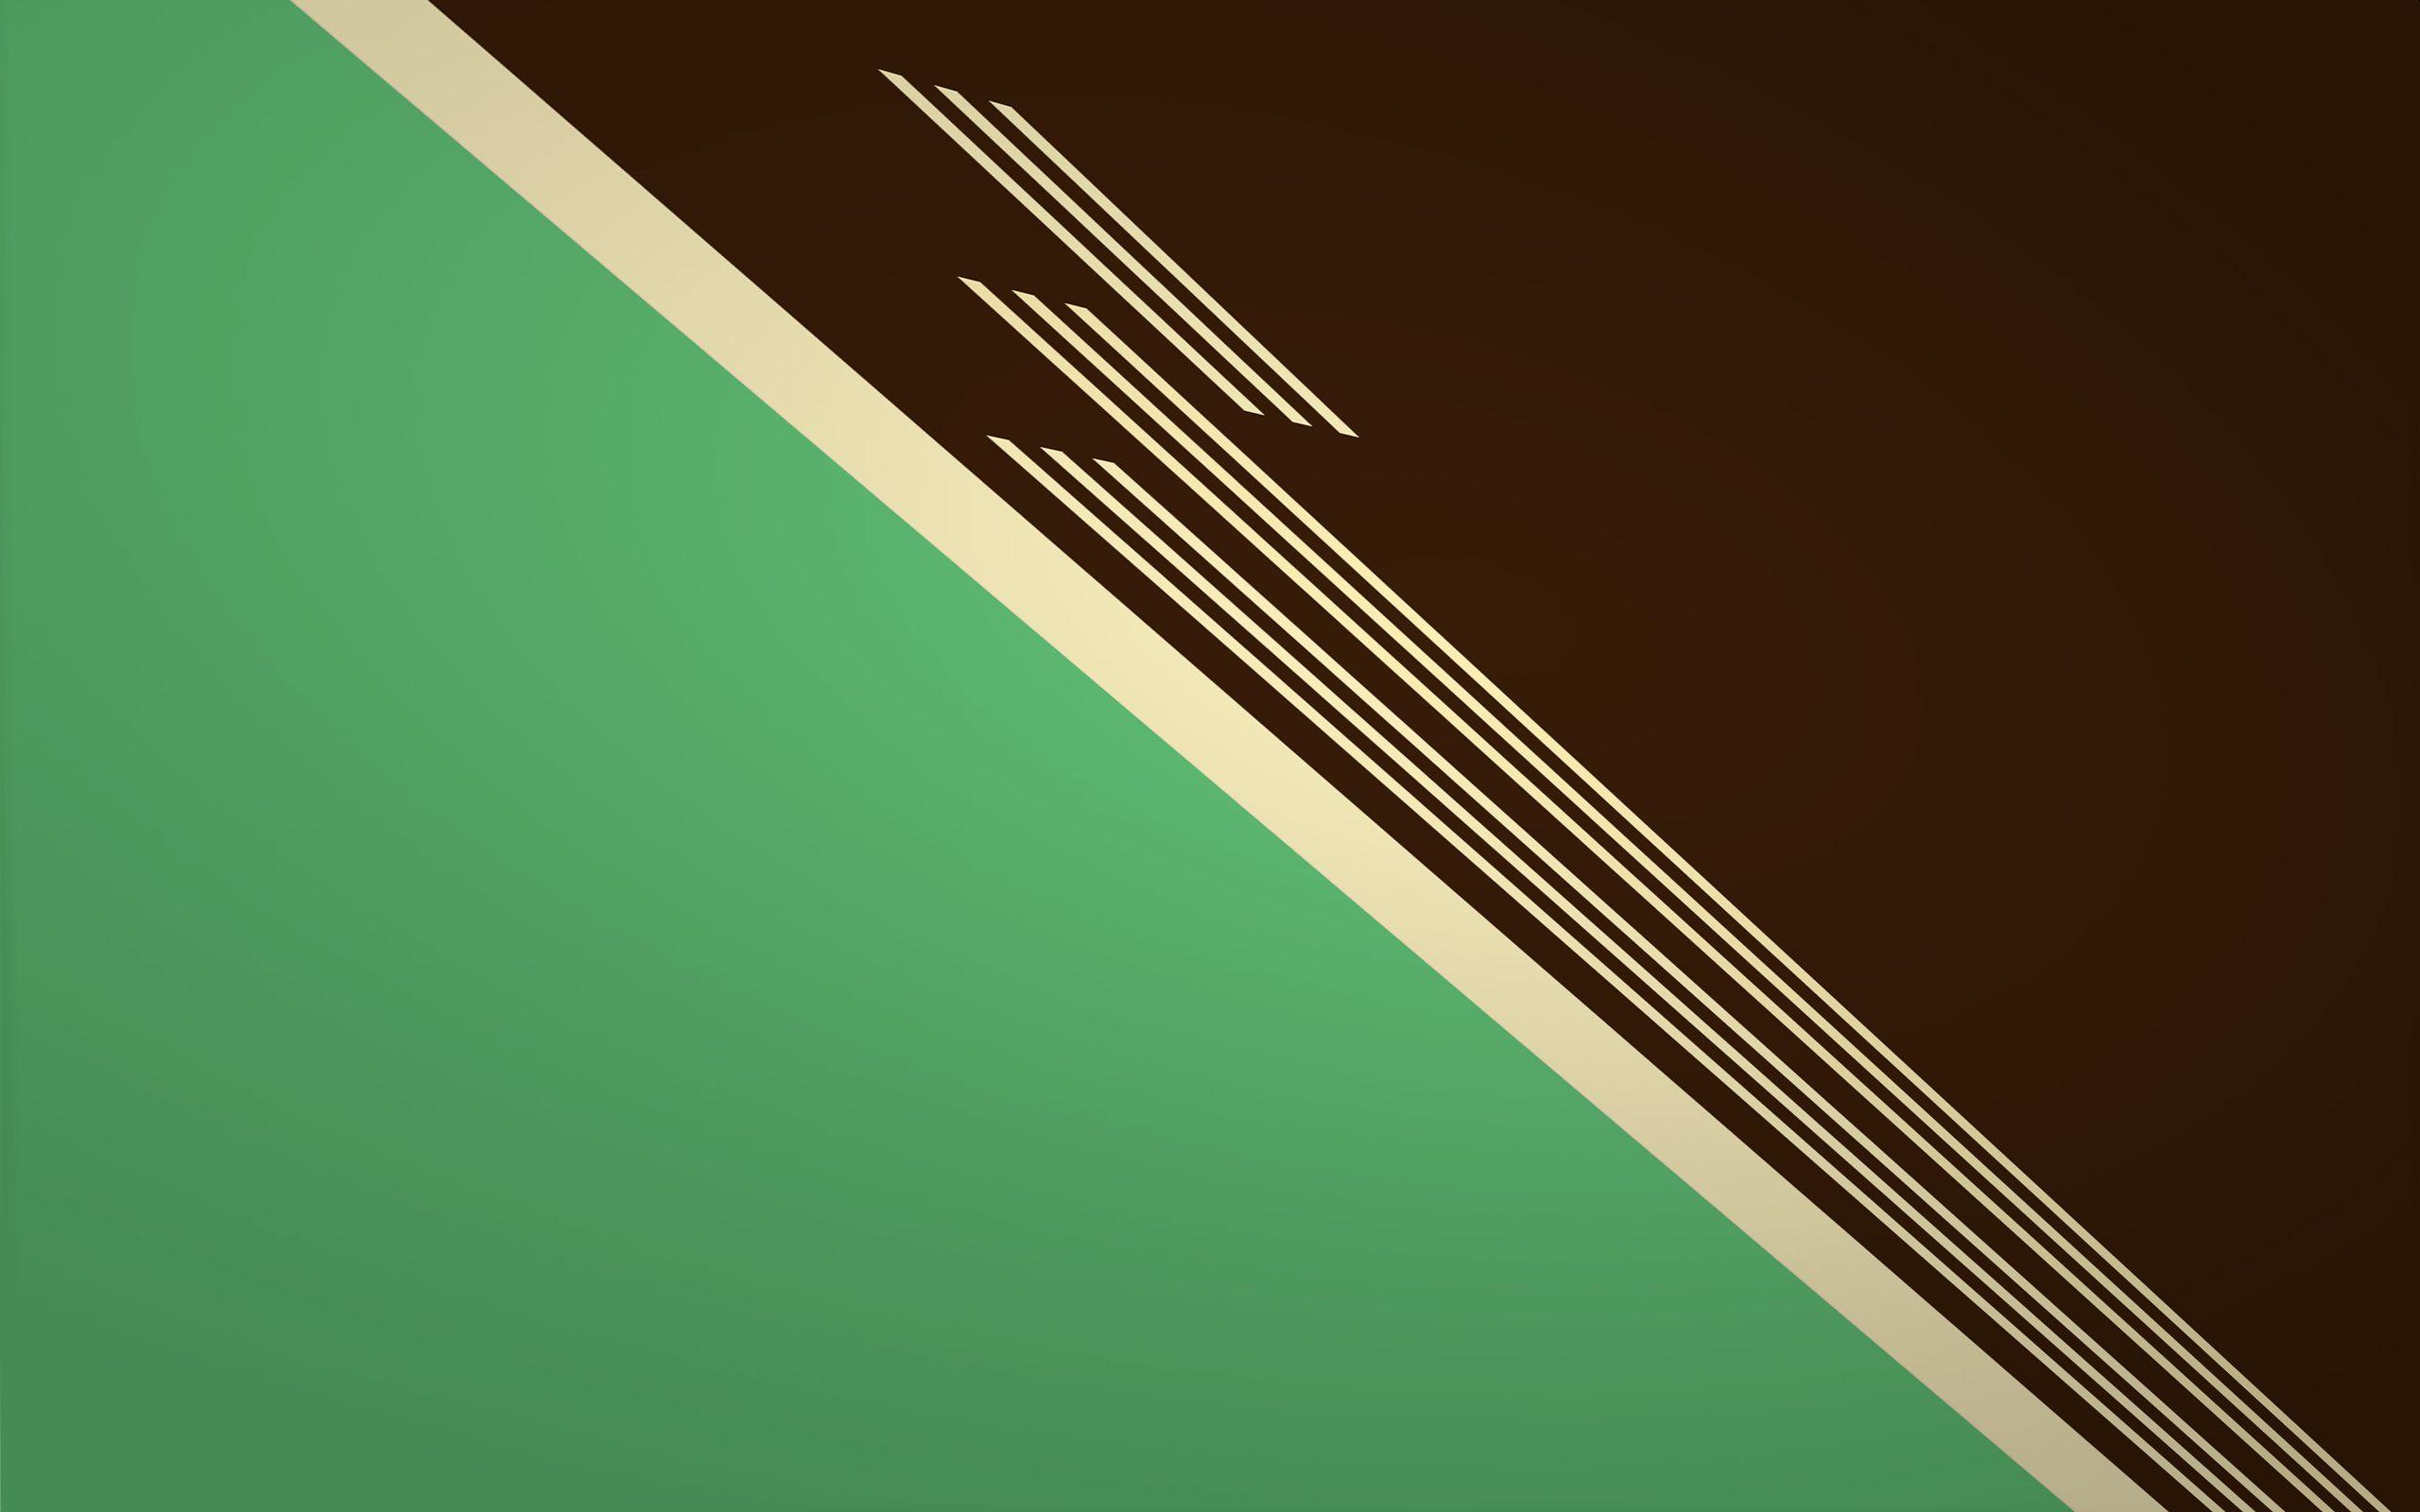 Retro Abstract Wallpapers 16911 2560x1600 px ~ HDWallSource